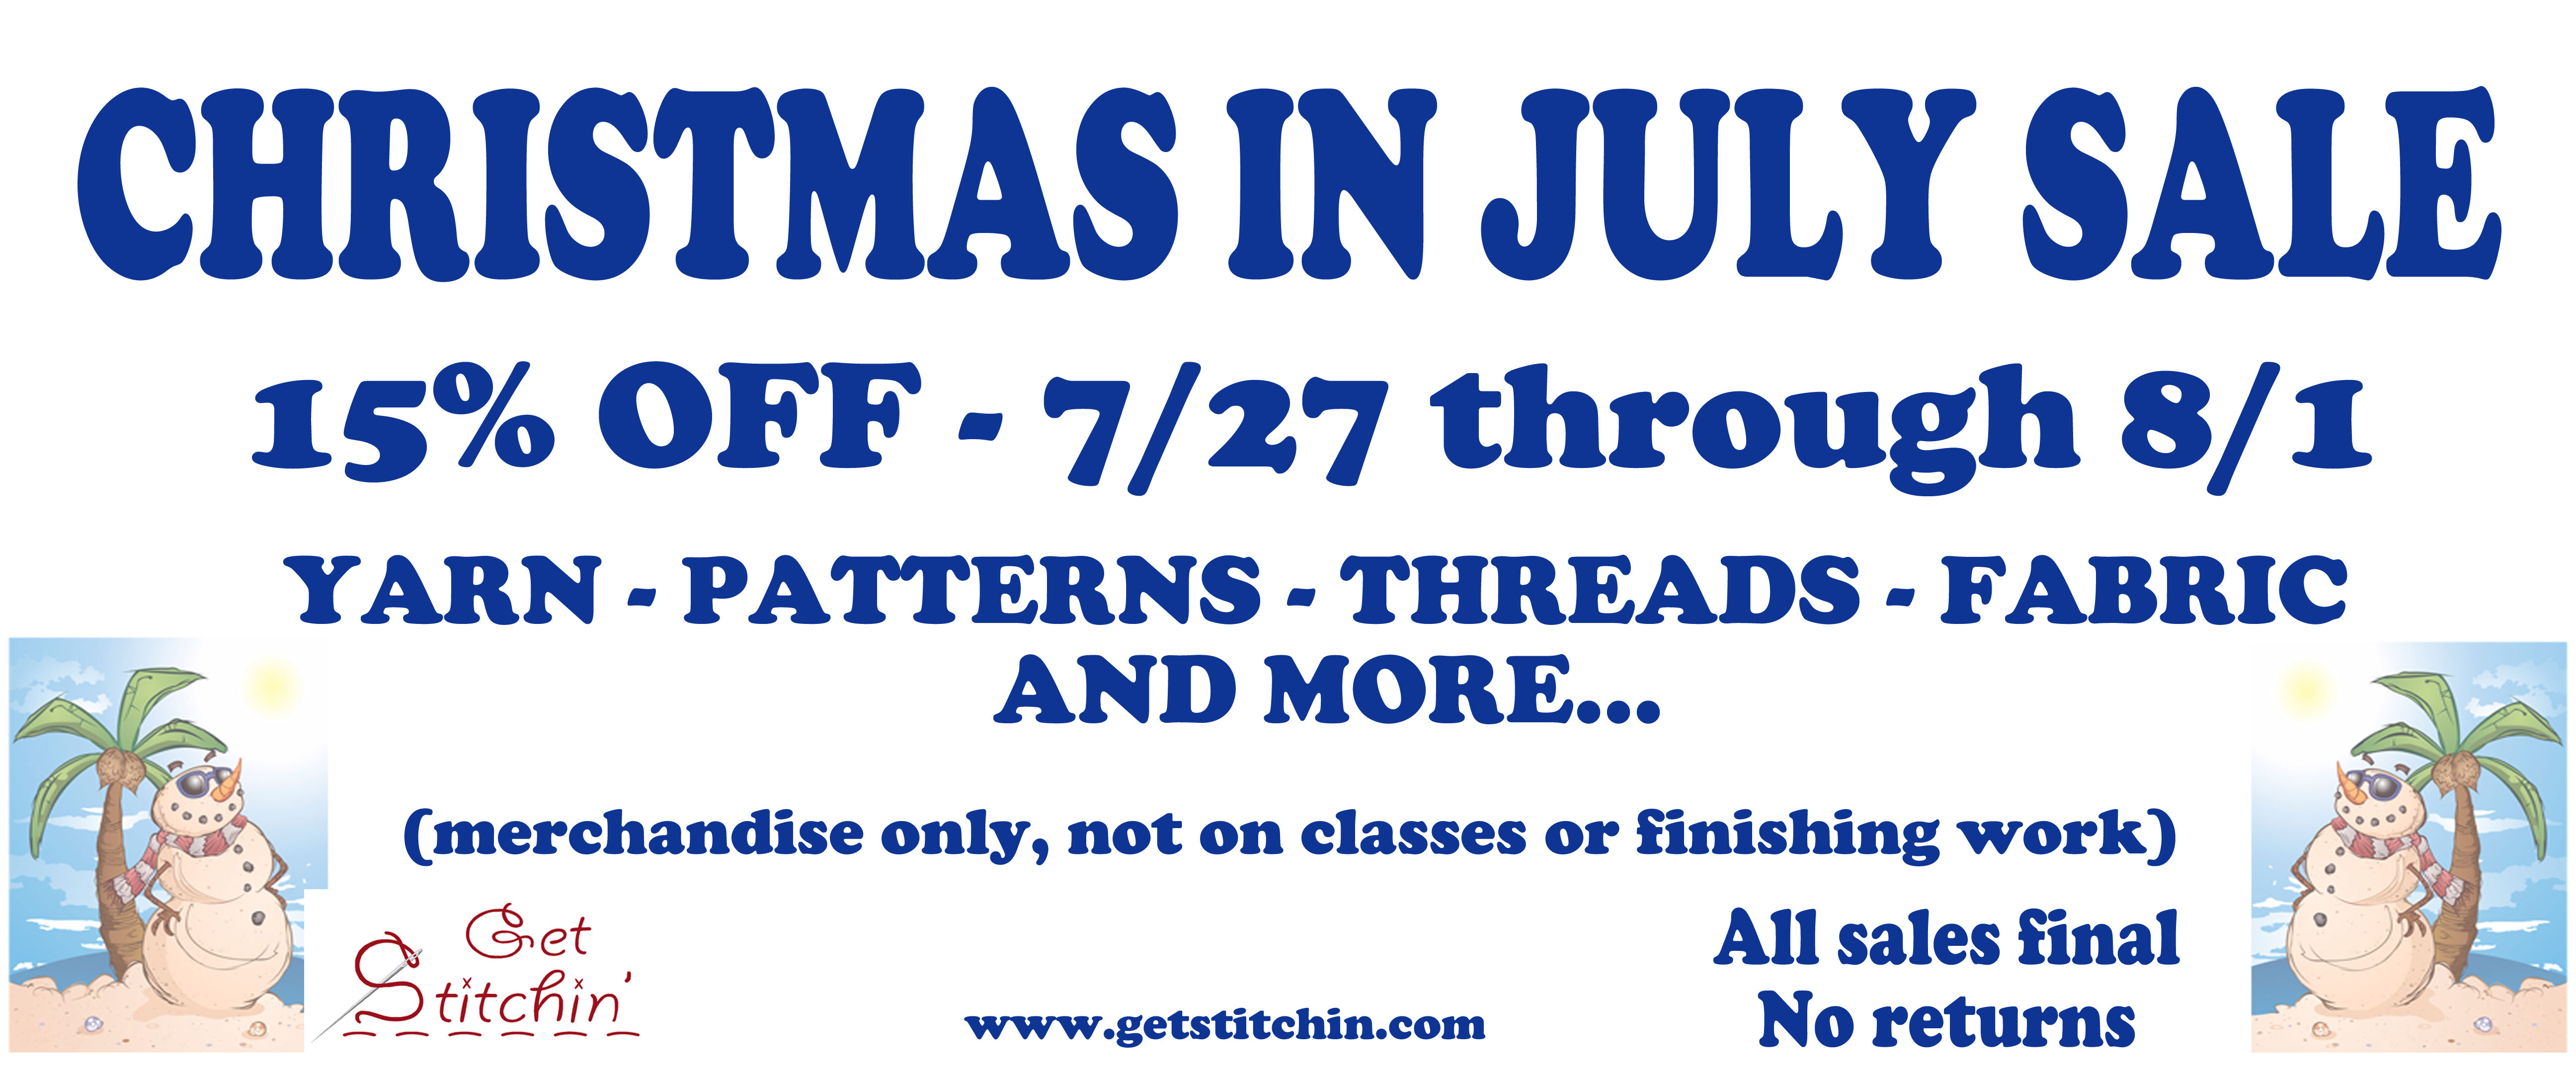 Christmas in July Sale, 2015